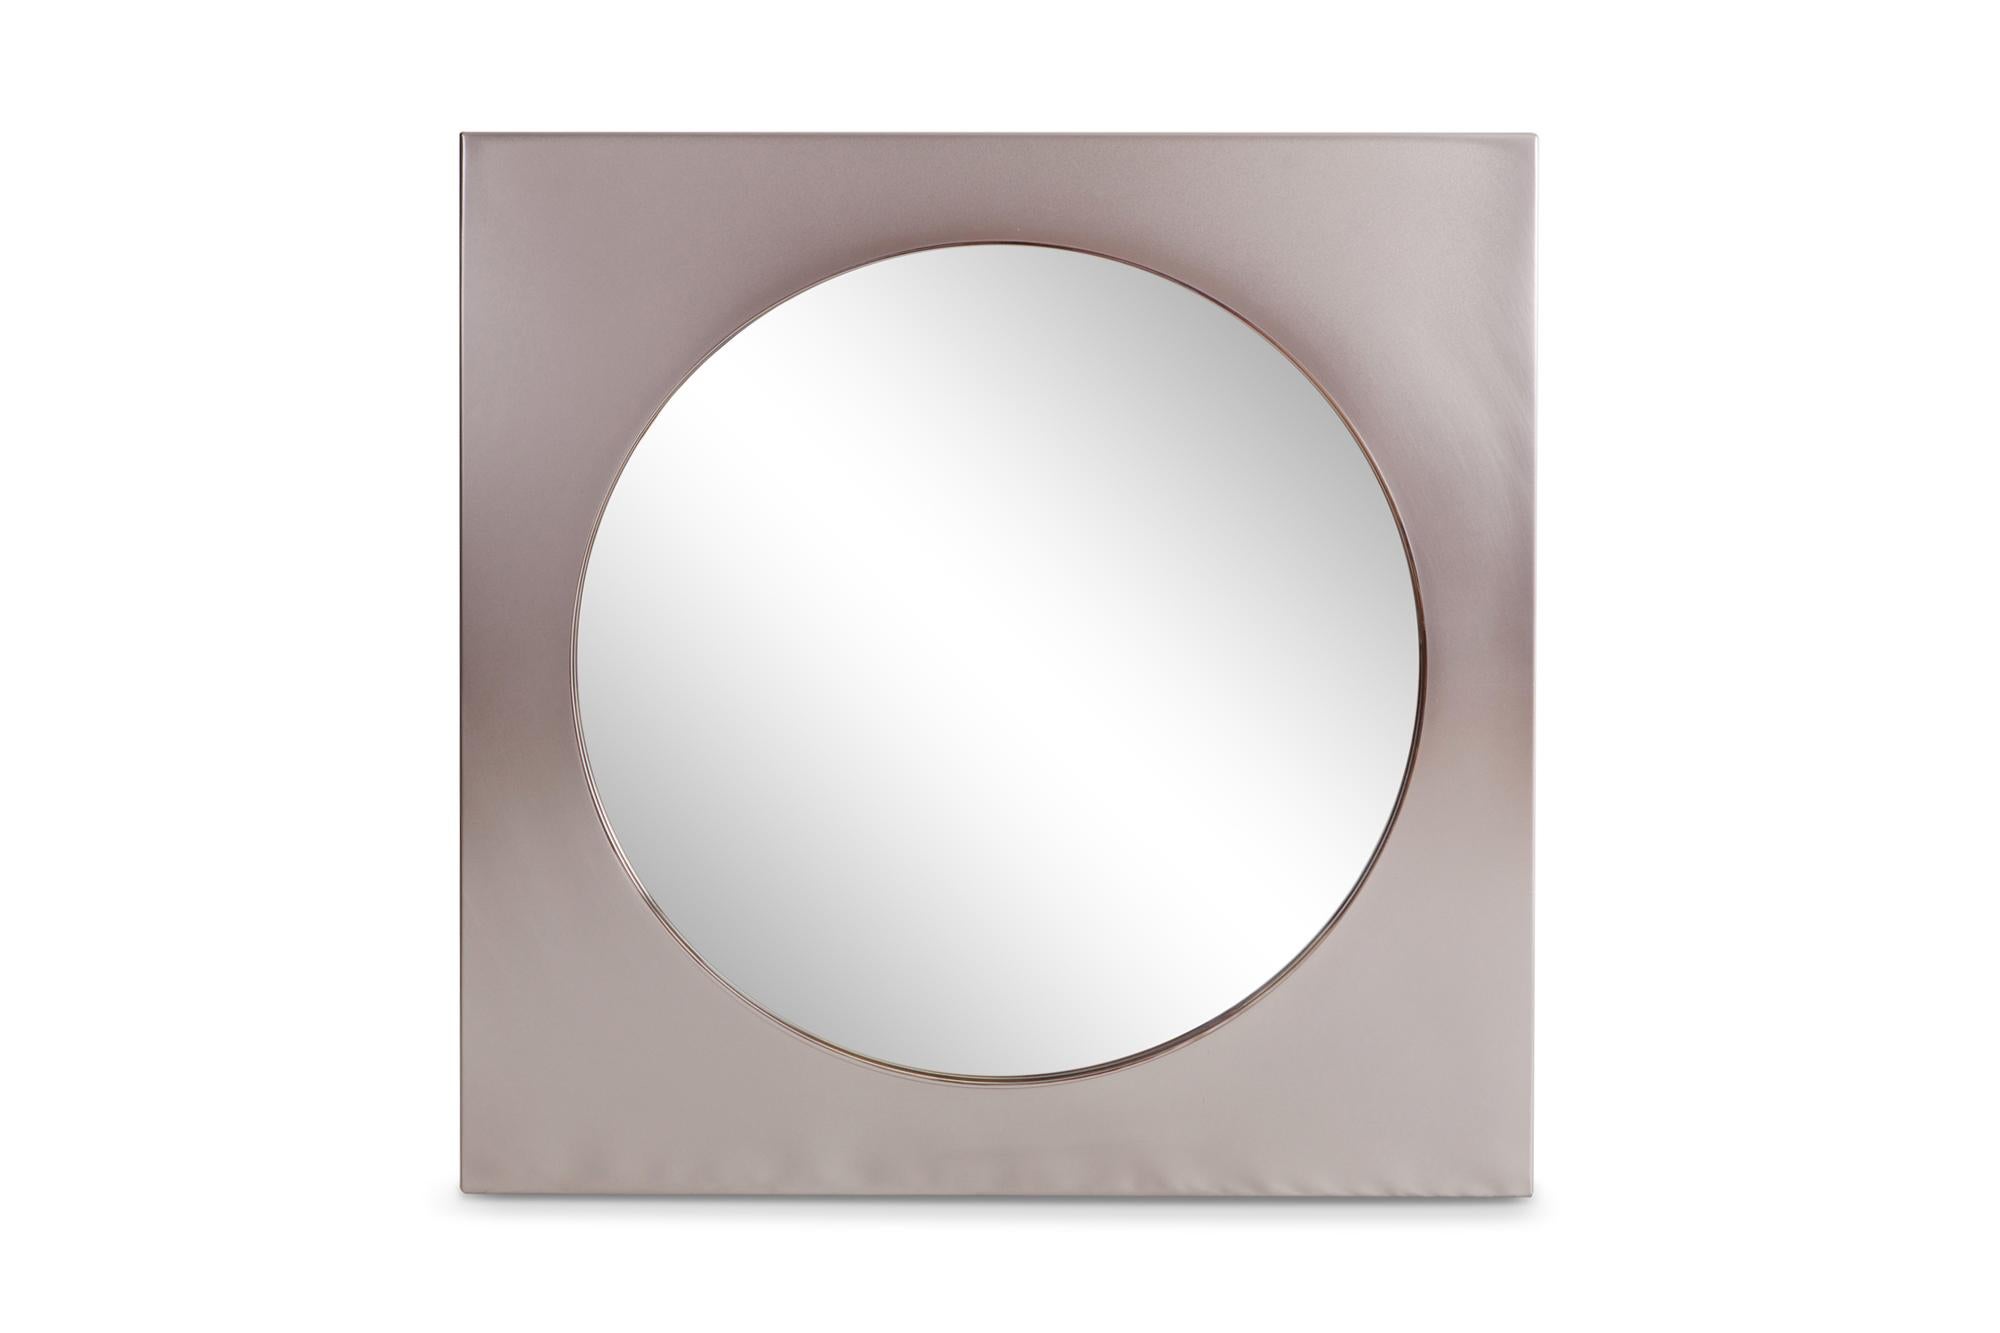 Minimalist postmodern square mirror by Belgo Chrom in brushed steel.

Would fit well in an eclectic Hollywood Regency interior inspired by Maison Jansen.
 